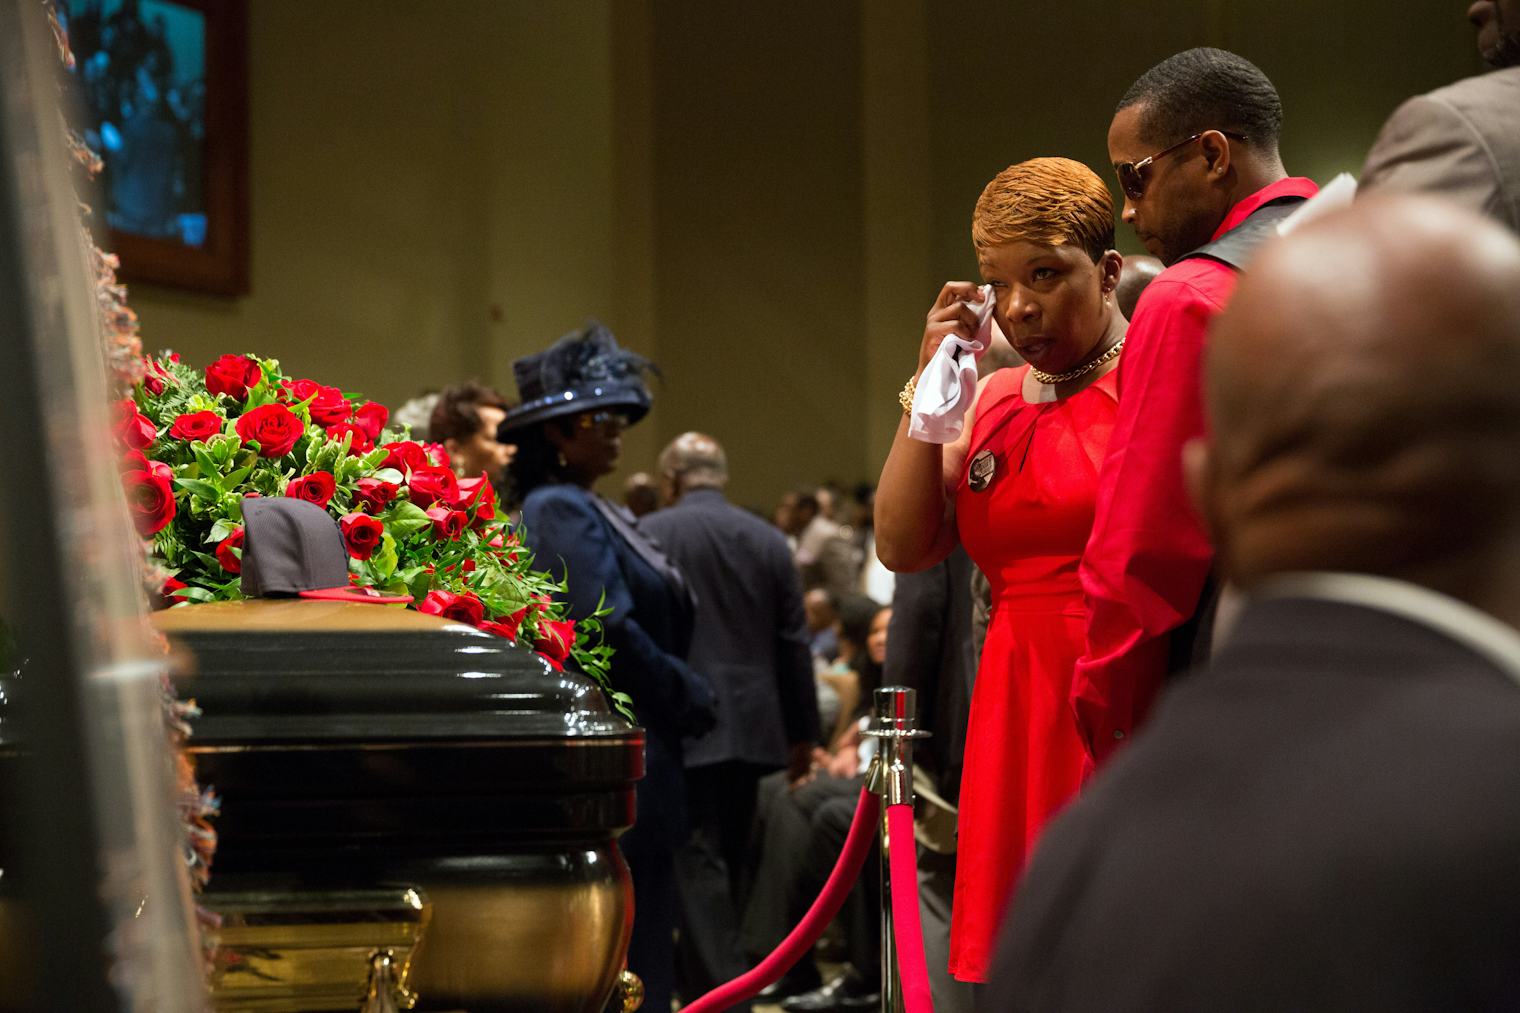 'The New York Times'' Michael Brown Obituary Is Misleading And Appalling